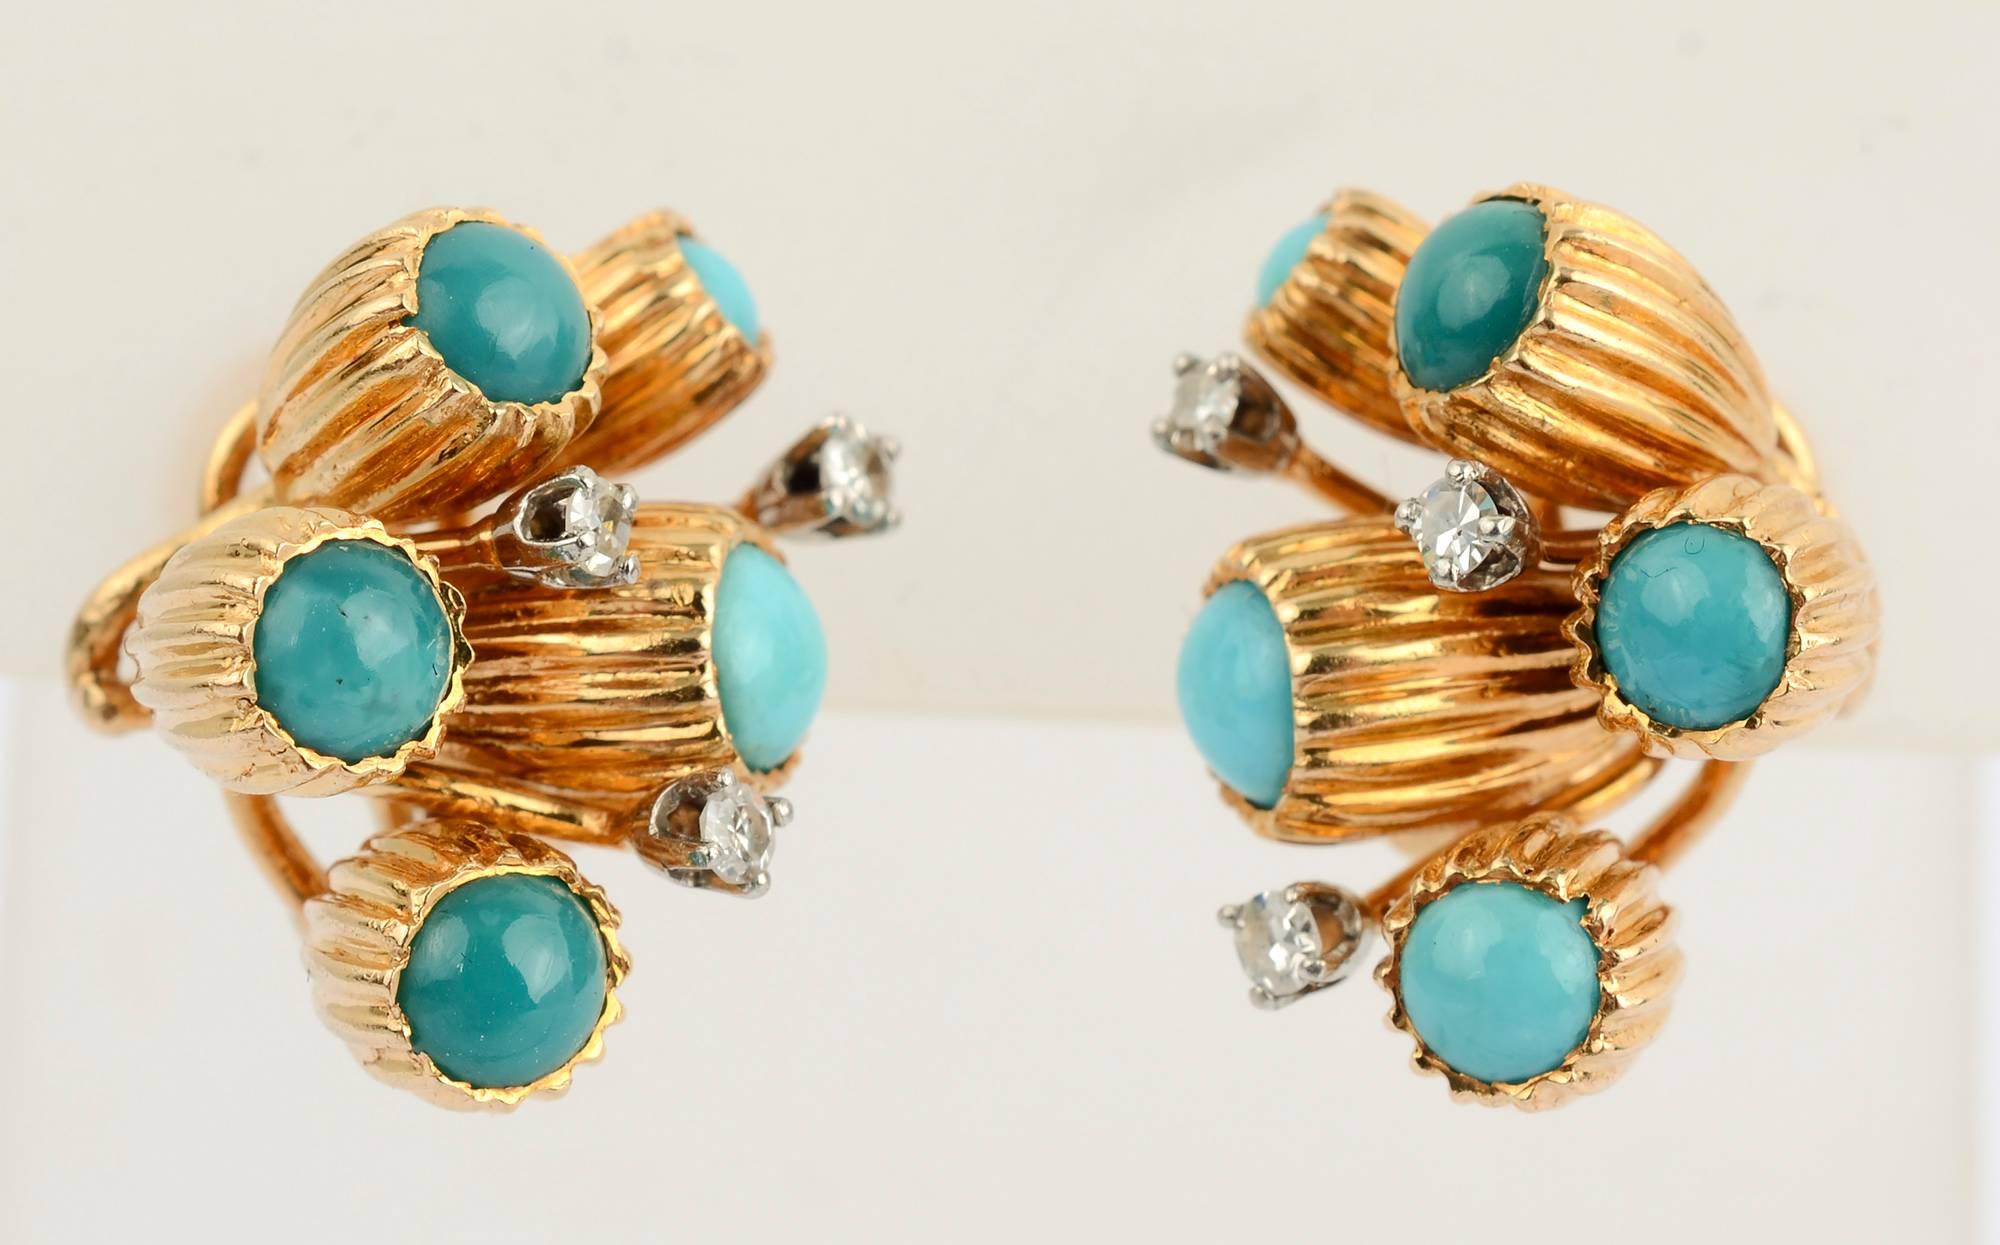 Unusual earrings with clusters of turquoise stones that are set in elongated, ribbed cups, perhaps meant to be bellflowers. In addition to five turquoise stones, each earring has three diamonds. Backs are clips and posts. 